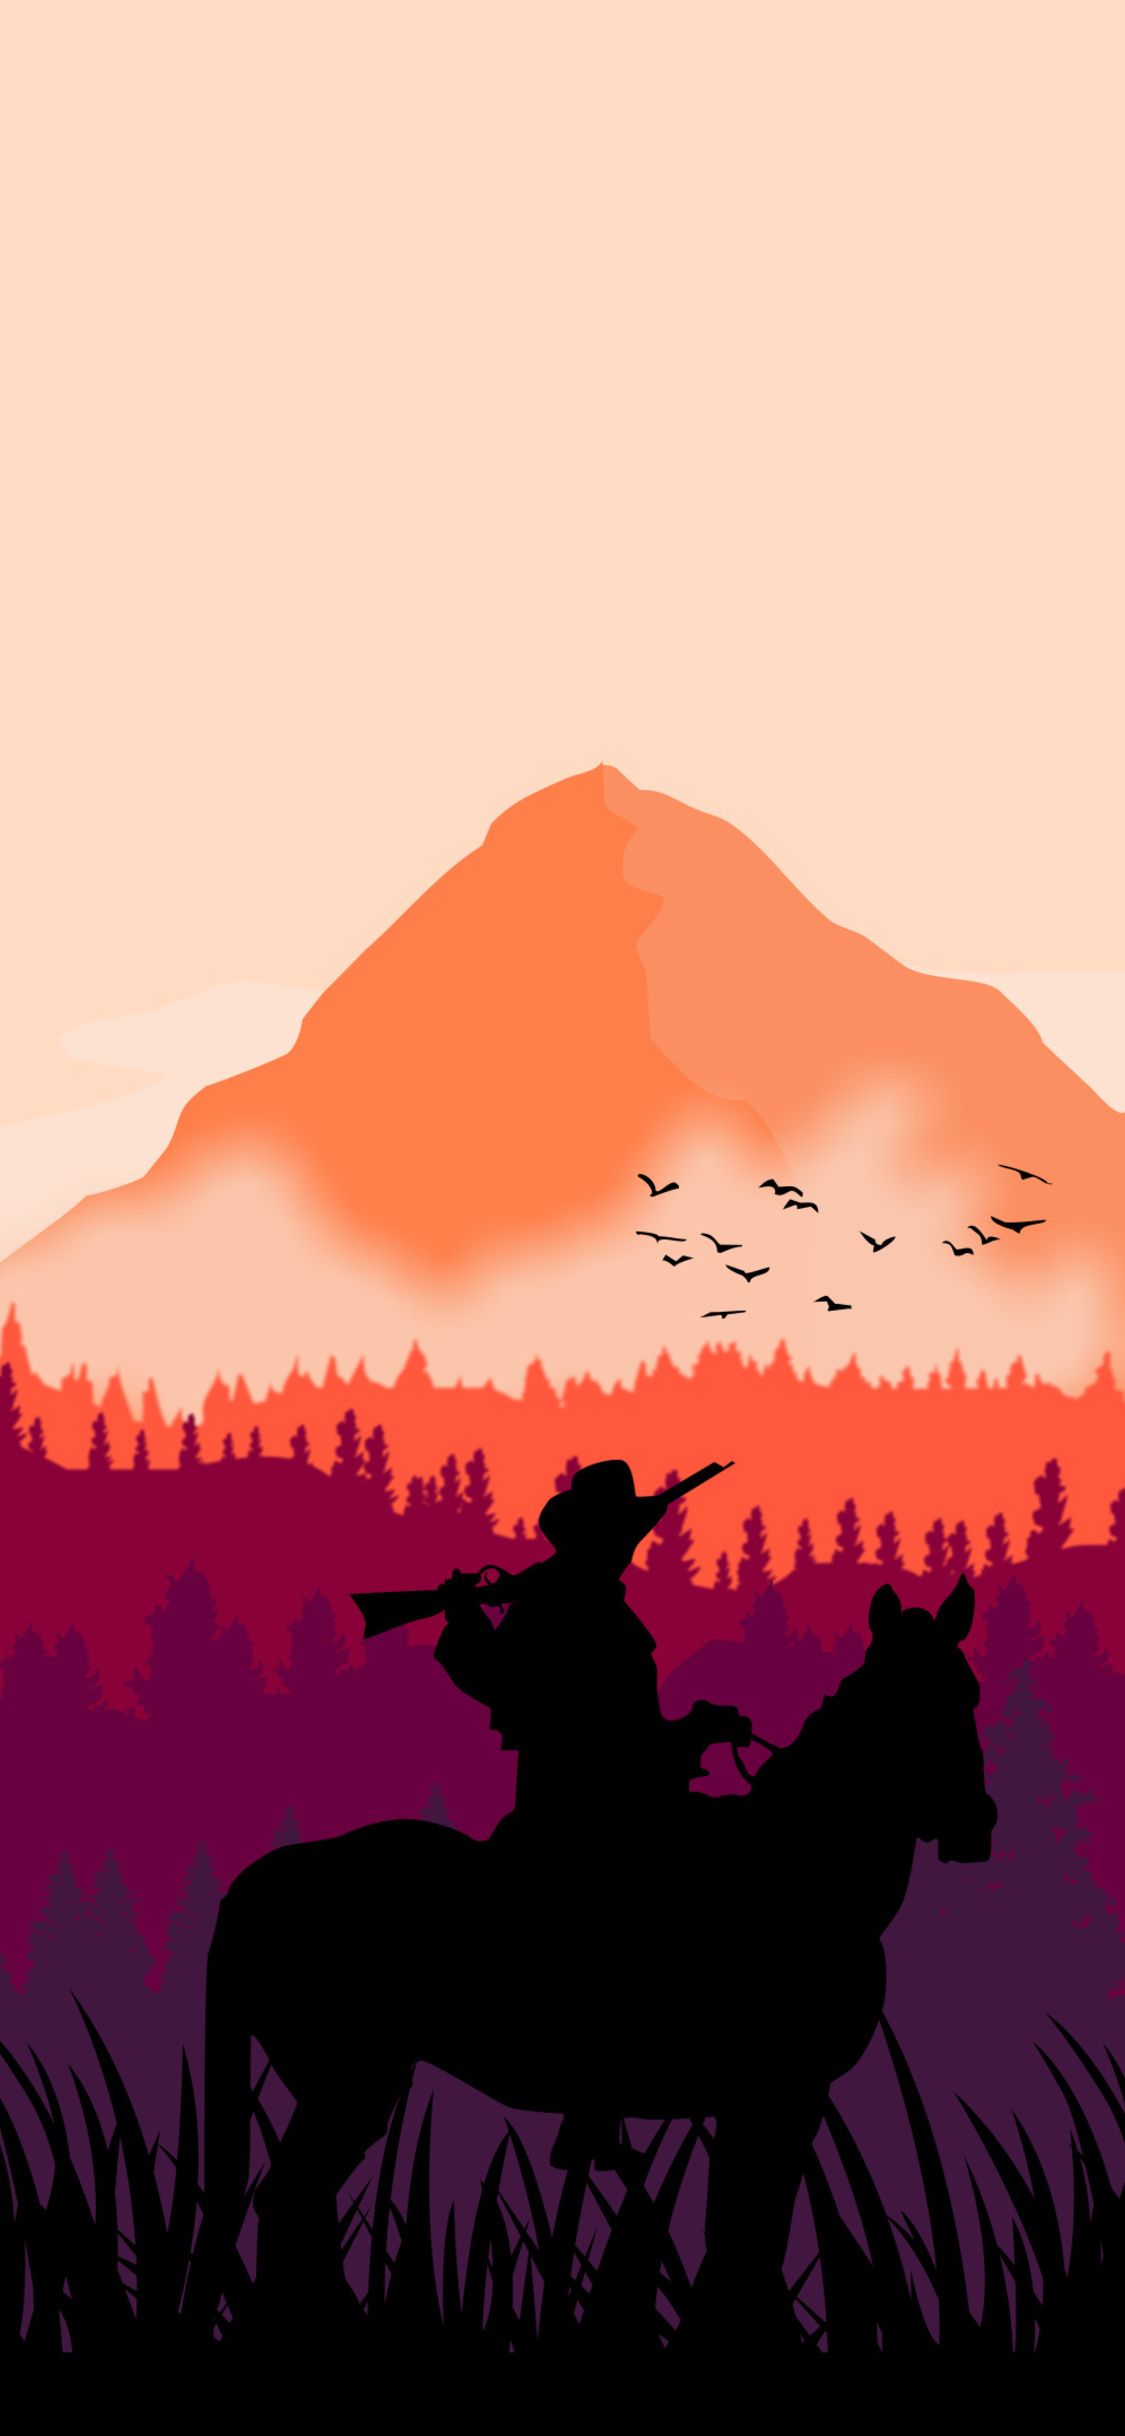 Red Dead Redemption 2 MInimal Art 4k iPhone XS, iPhone iPhone X HD 4k Wallpaper, Image, Background, Photo and Picture